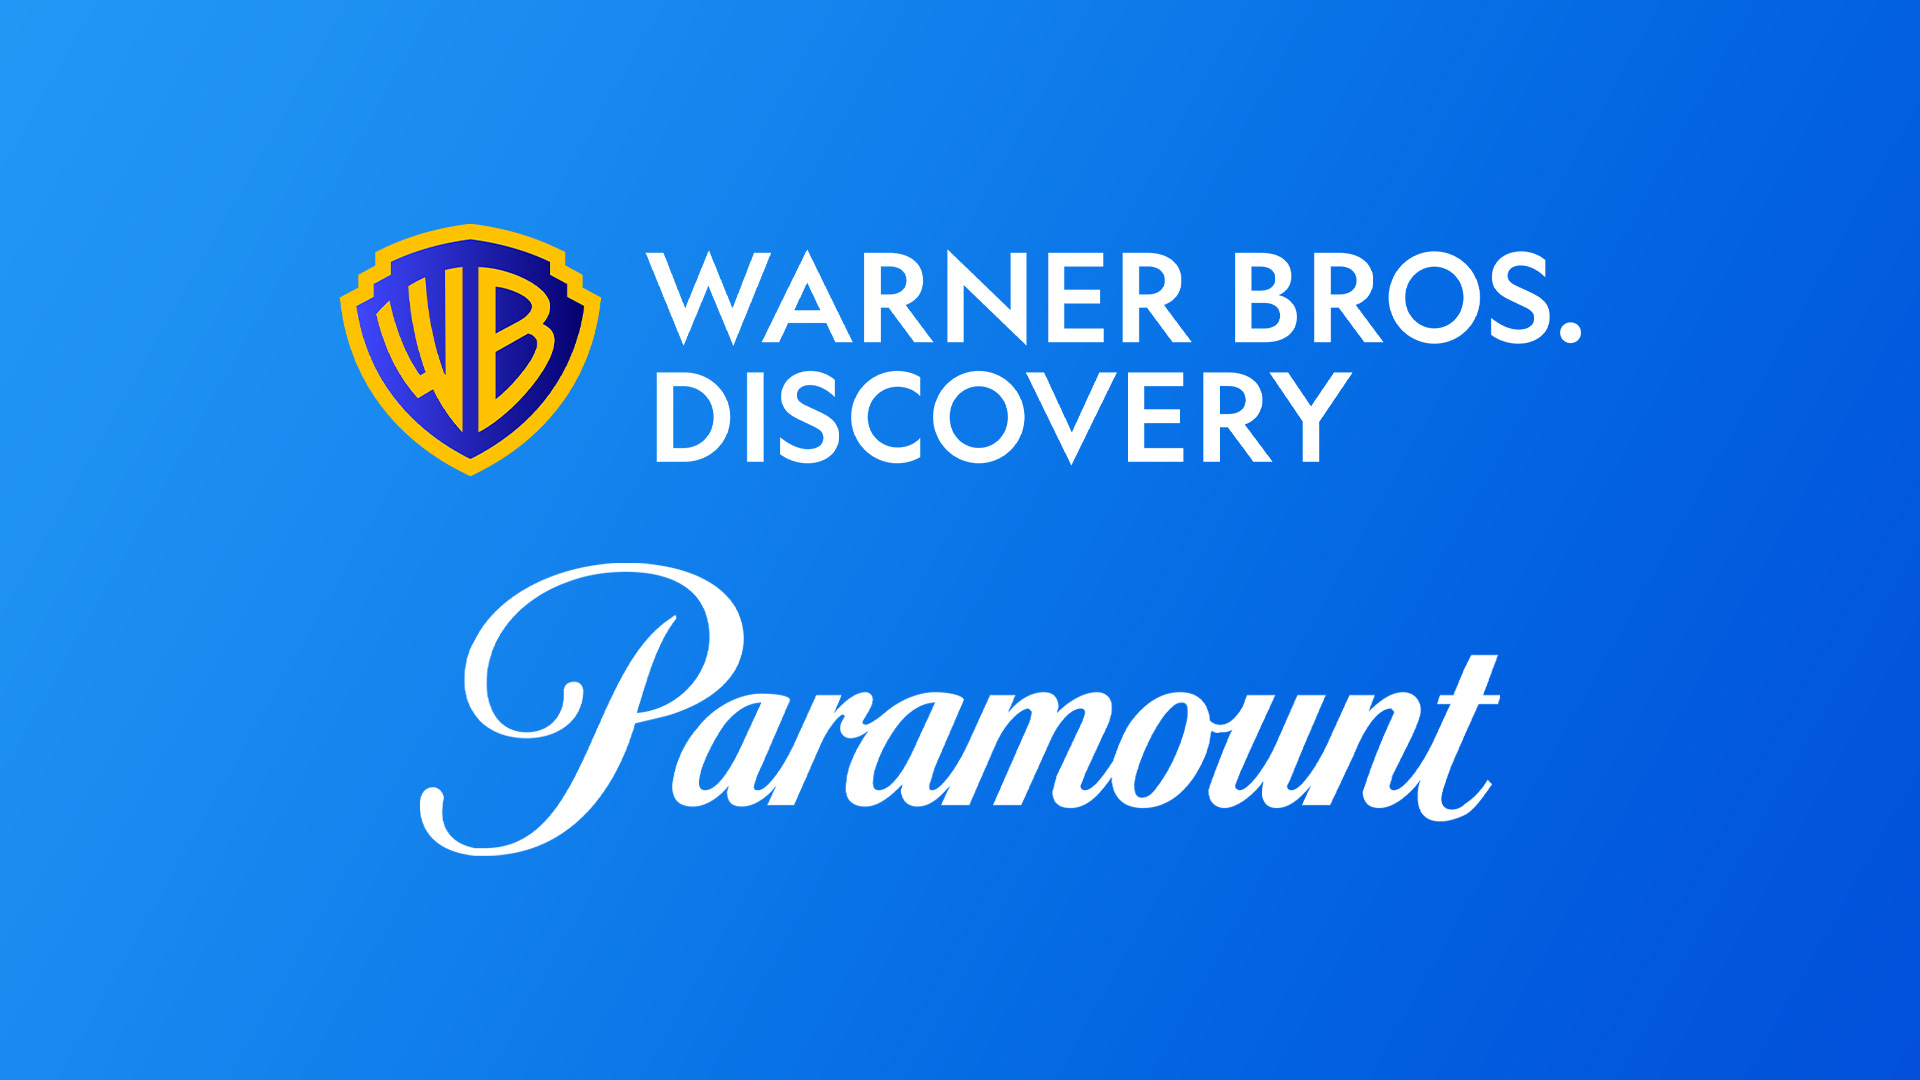 Why Paramount and Warner Bros. Ditched Their Mega Merger Plan?